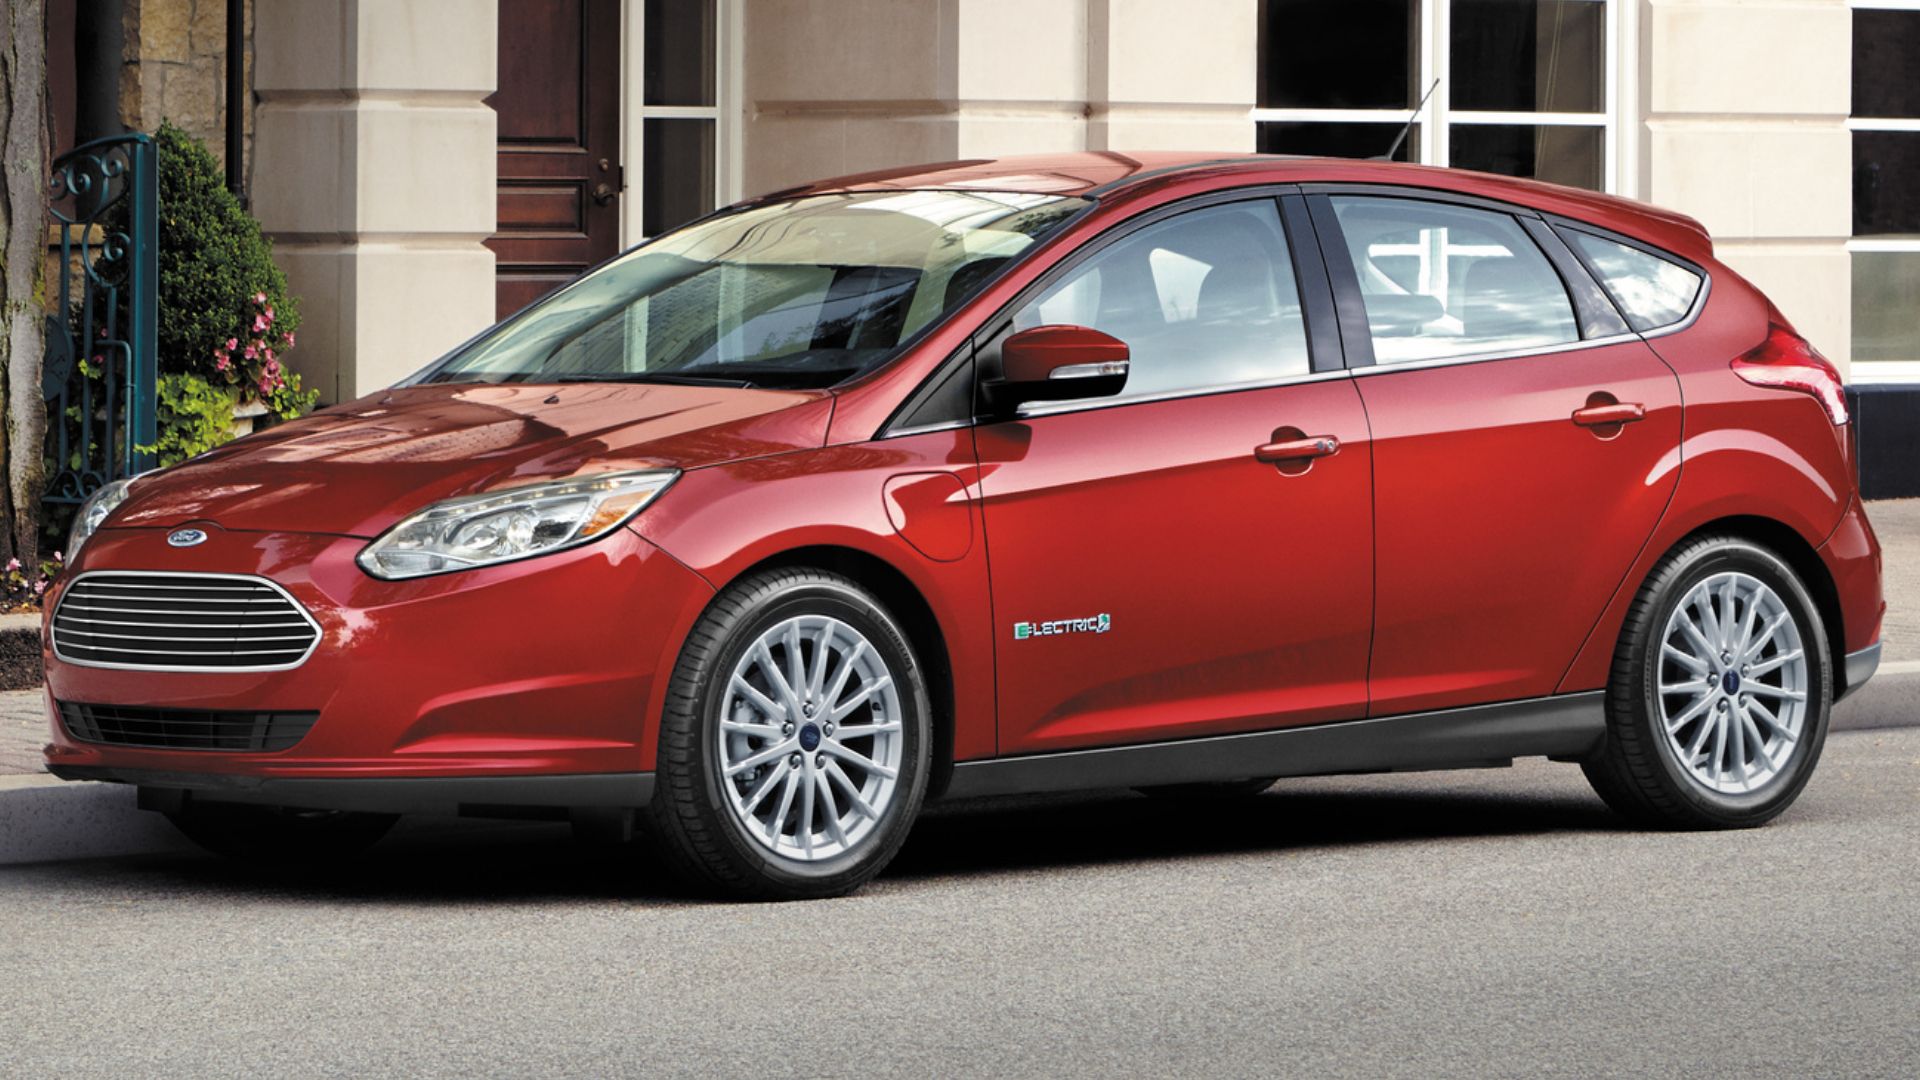 2017 Ford Focus Electric in red 